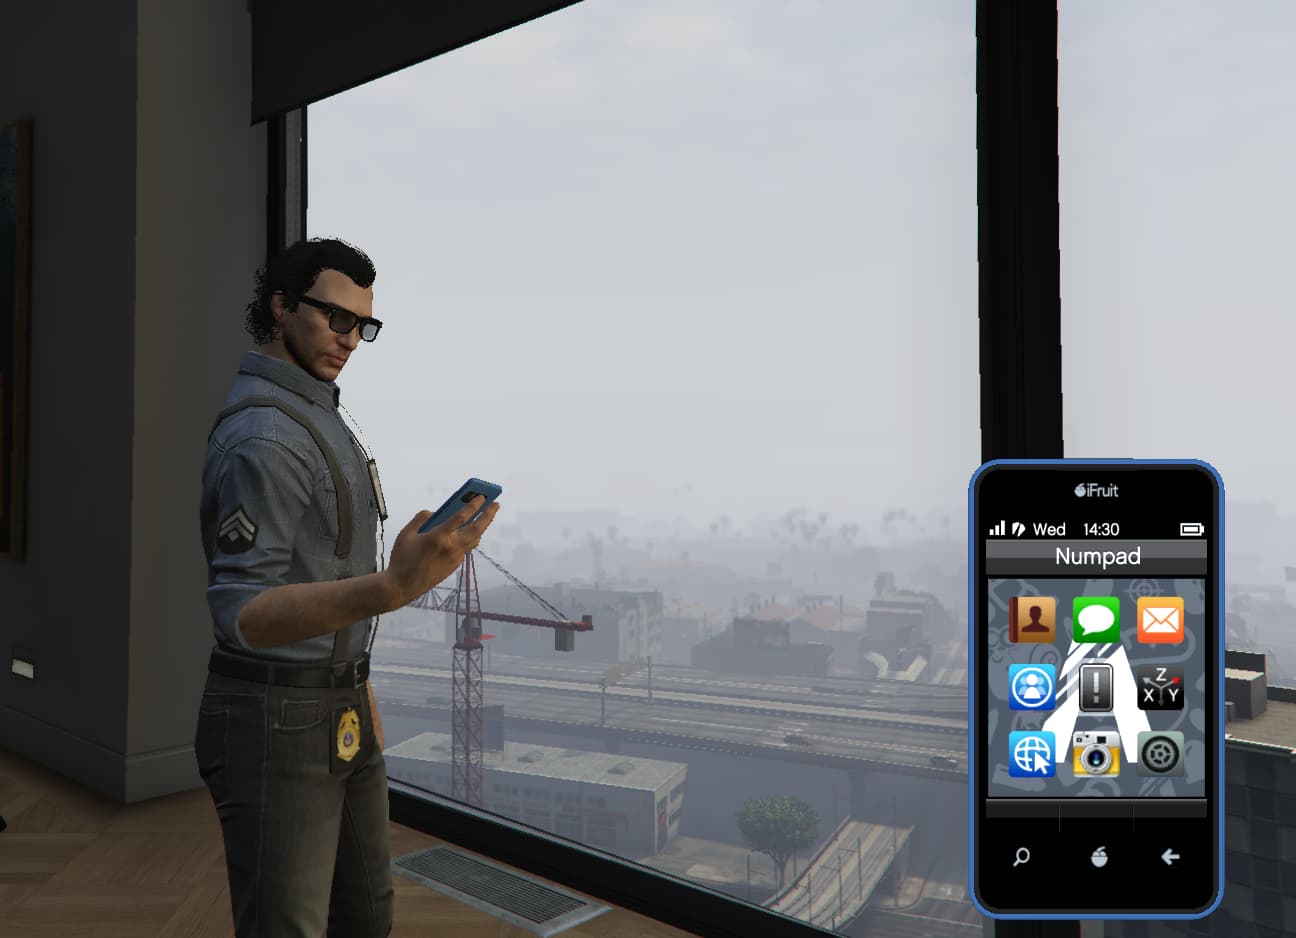 GTA 5 iFruit Kit Now Available For Your iPhone